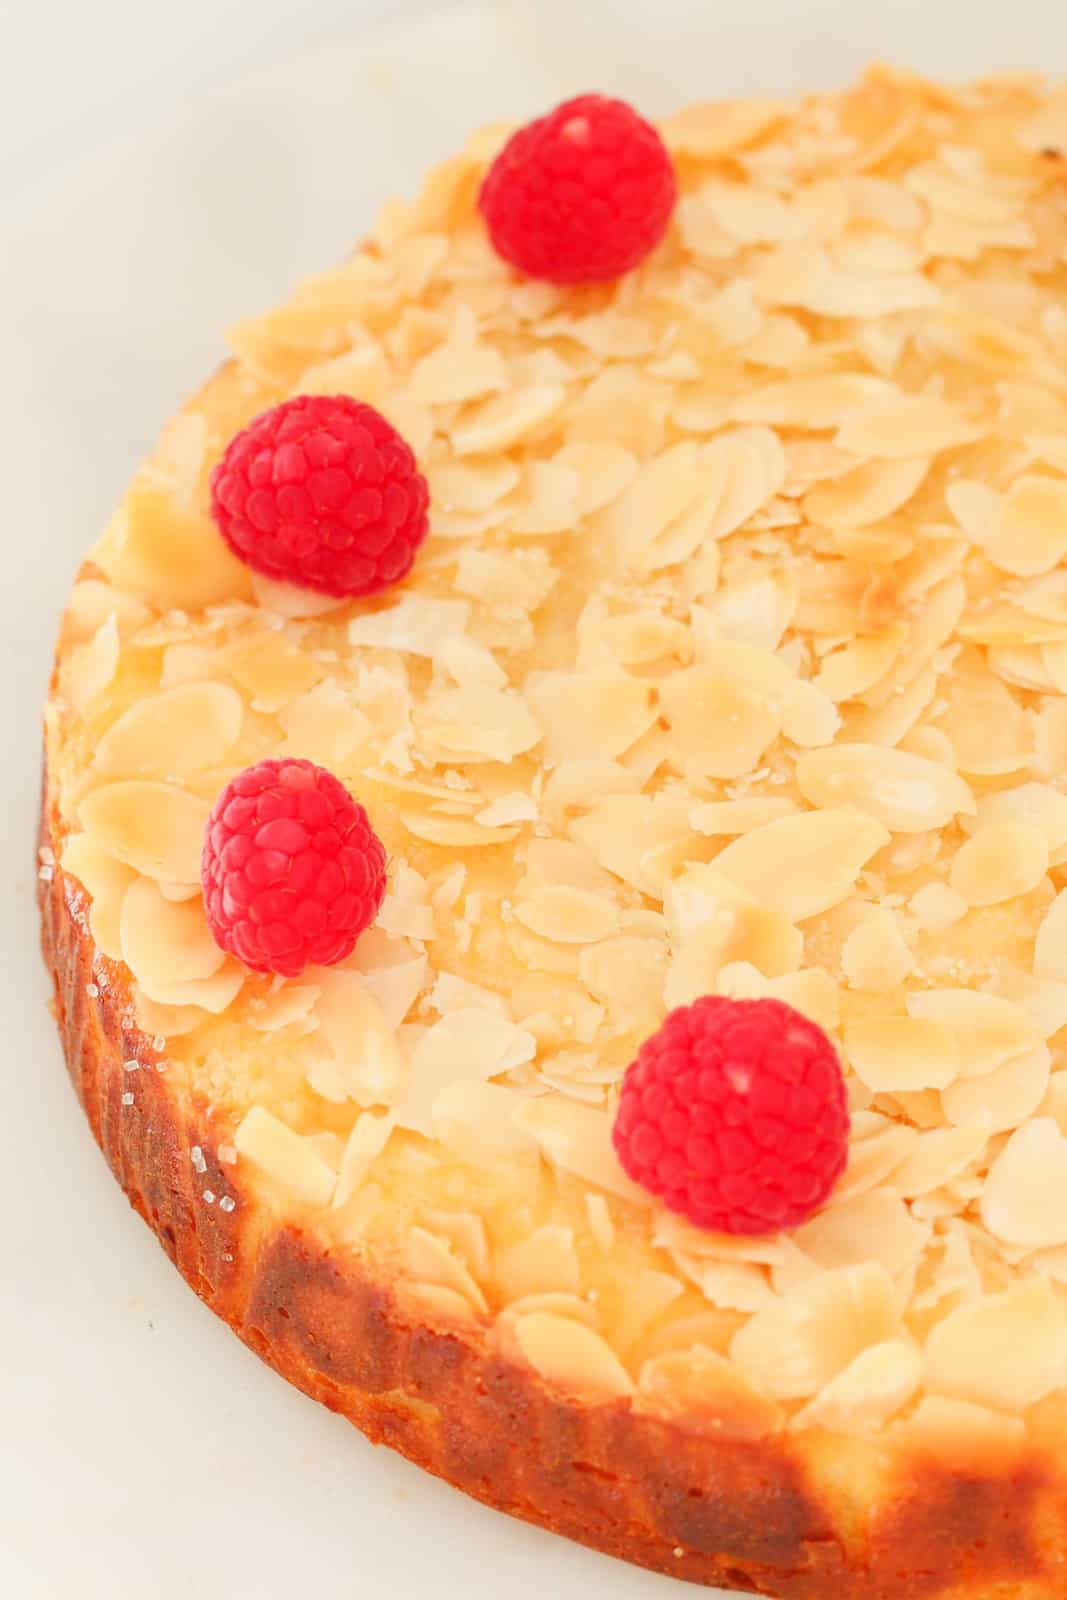 Overhead shot of a lemon cake topped with raspberries and flaked almonds